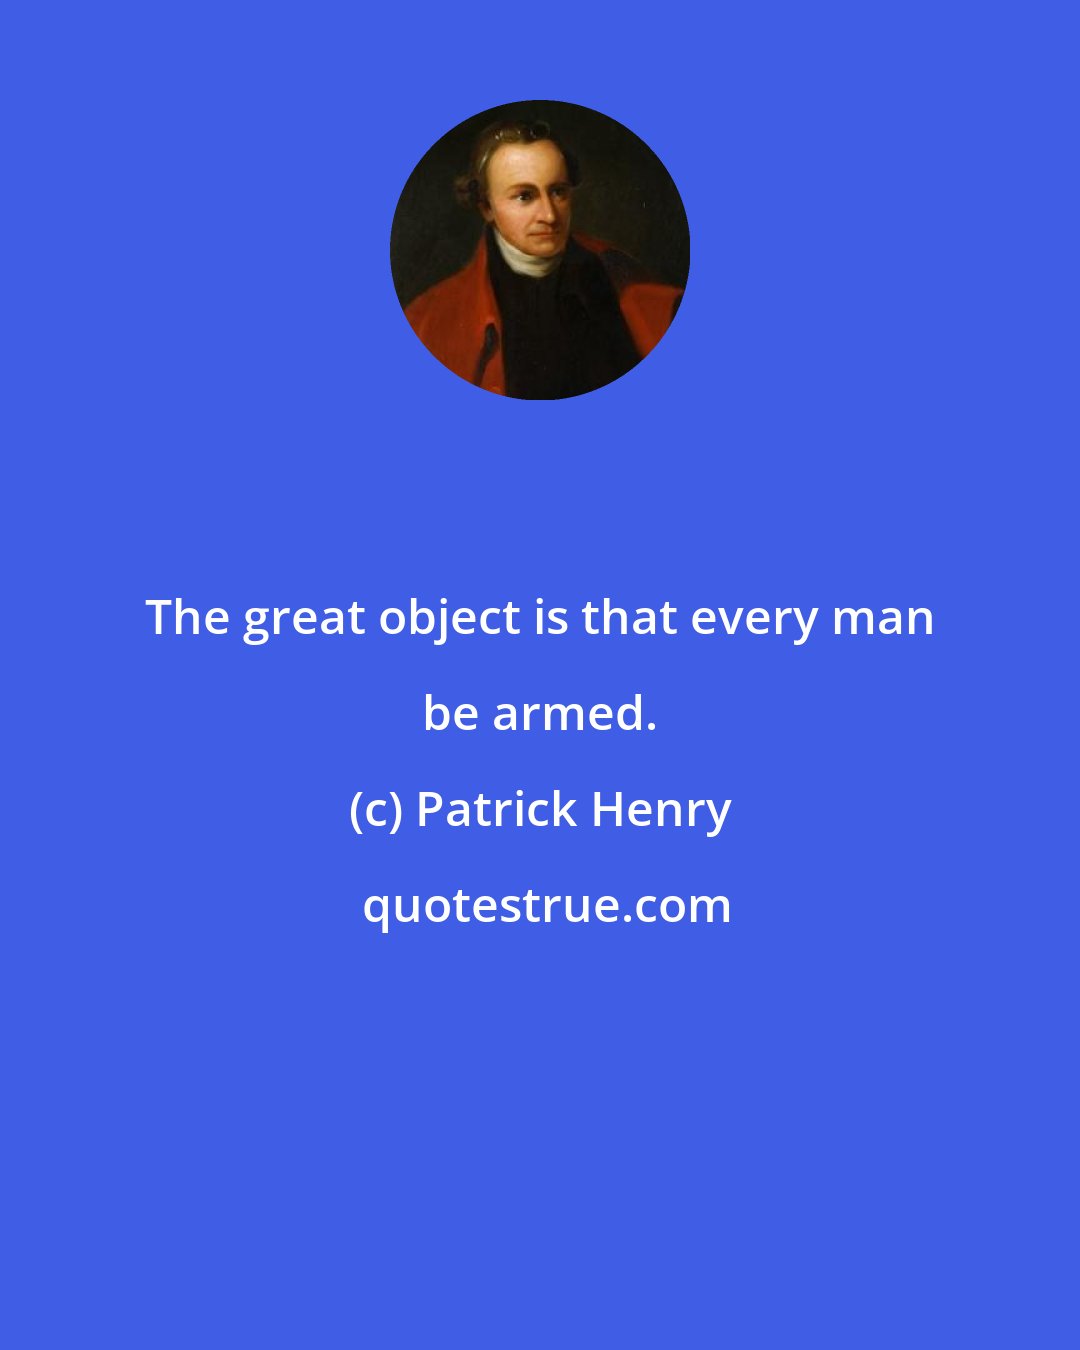 Patrick Henry: The great object is that every man be armed.